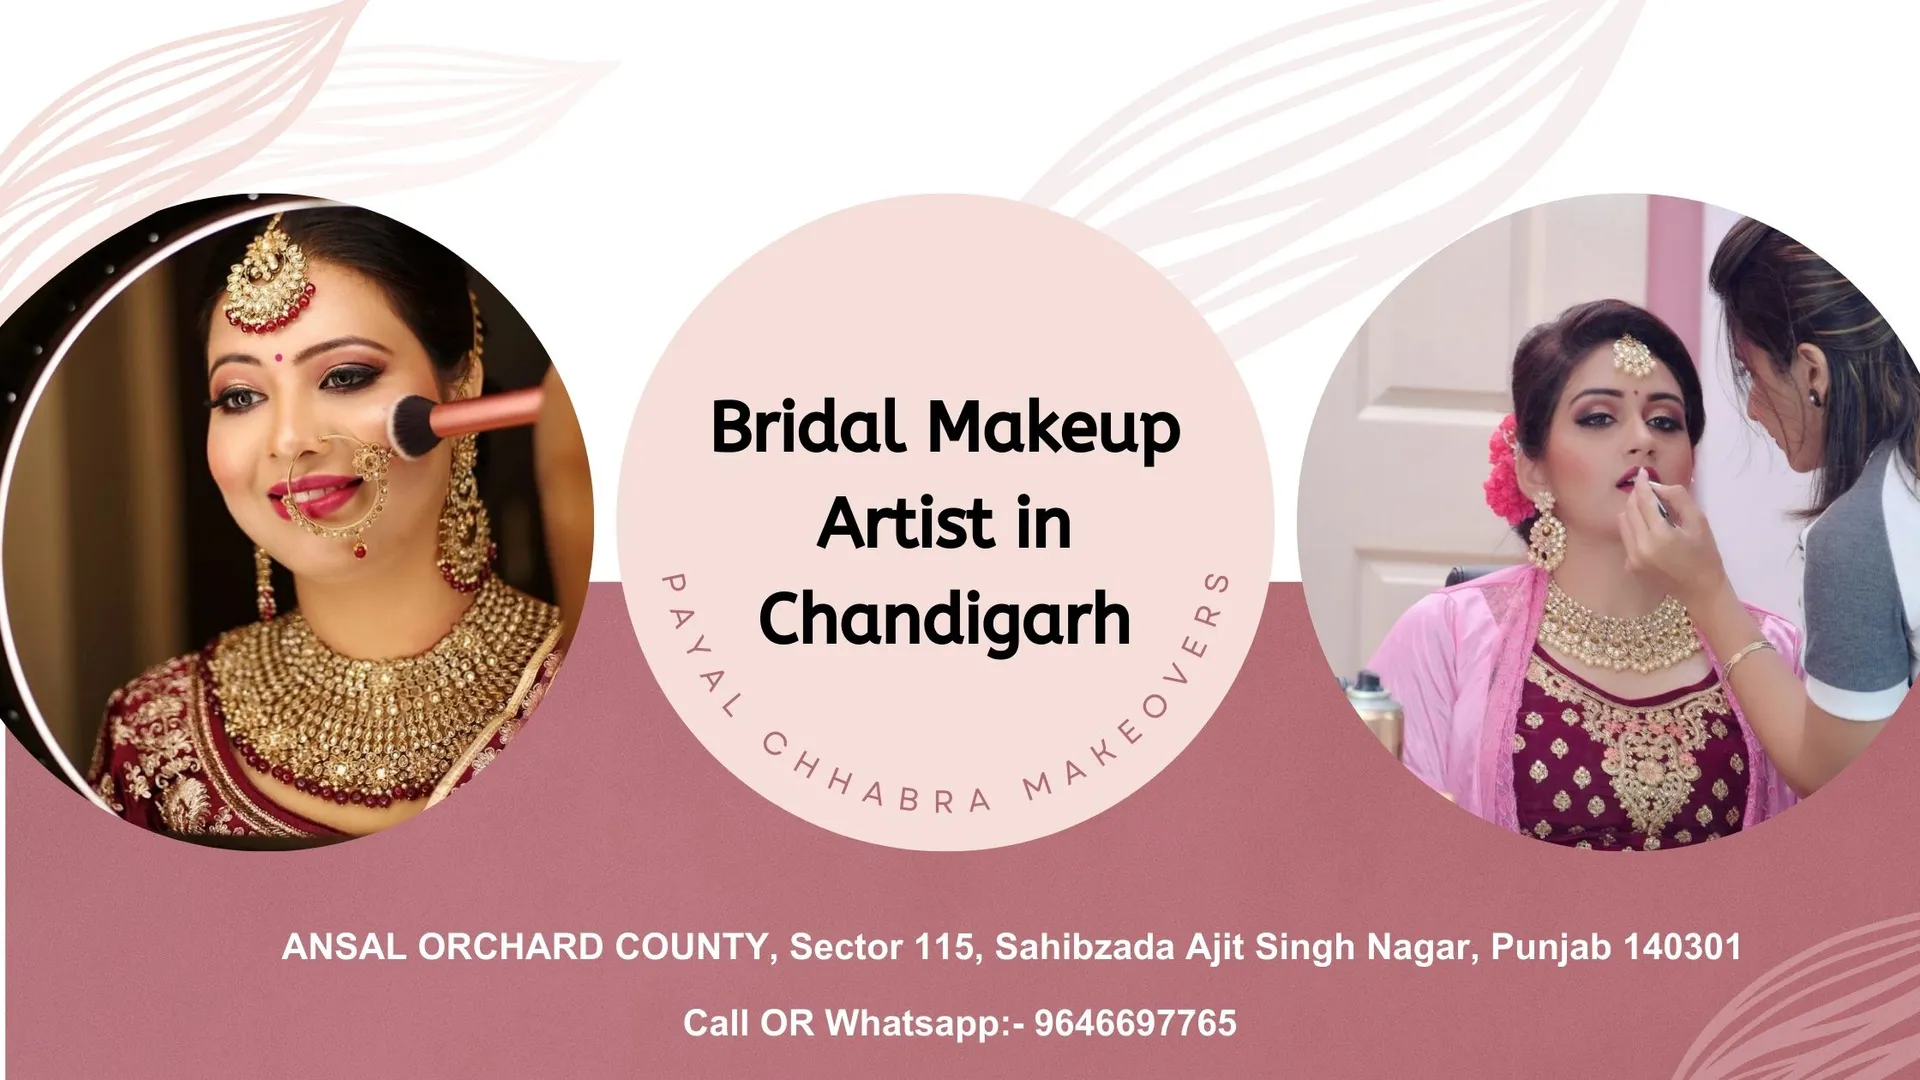 Discover your perfect bridal look with Payal Chhabra Makeovers, the premier bridal makeup artist in Chandigarh. As a highly skilled and creative makeup artist, Payal Chhabra is dedicated to making your wedding day extraordinary and memorable.

With a keen eye for detail and a passion for enhancing natural beauty, Payal crafts exquisite bridal makeovers that reflect your unique personality and style. From traditional to contemporary, she excels in creating diverse looks that leave every bride feeling confident and radiant.

Using top-quality products and innovative techniques, Payal ensures your makeup stays flawless throughout the day, capturing every cherished moment. Her personalized approach and warm demeanor create a comfortable and enjoyable experience, making you feel at ease on your special day.

For the ultimate bridal transformation, entrust your dreams to Payal Chhabra Makeovers, the go-to bridal makeup artist in Chandigarh. Book your appointment now and embrace the radiance of your inner beauty. https://g.co/kgs/7eMr4B

Payal Chhabra Makeovers
Contact Person Name:- Payal Chhabra
Phone no. 9646697765
Address:- ANSAL ORCHARD COUNTY, Sector 115, Sahibzada Ajit Singh Nagar, Punjab 140301
Website:- https://bit.ly/43LmPeW
Email:- payalchhabramakeovers@gmail.com